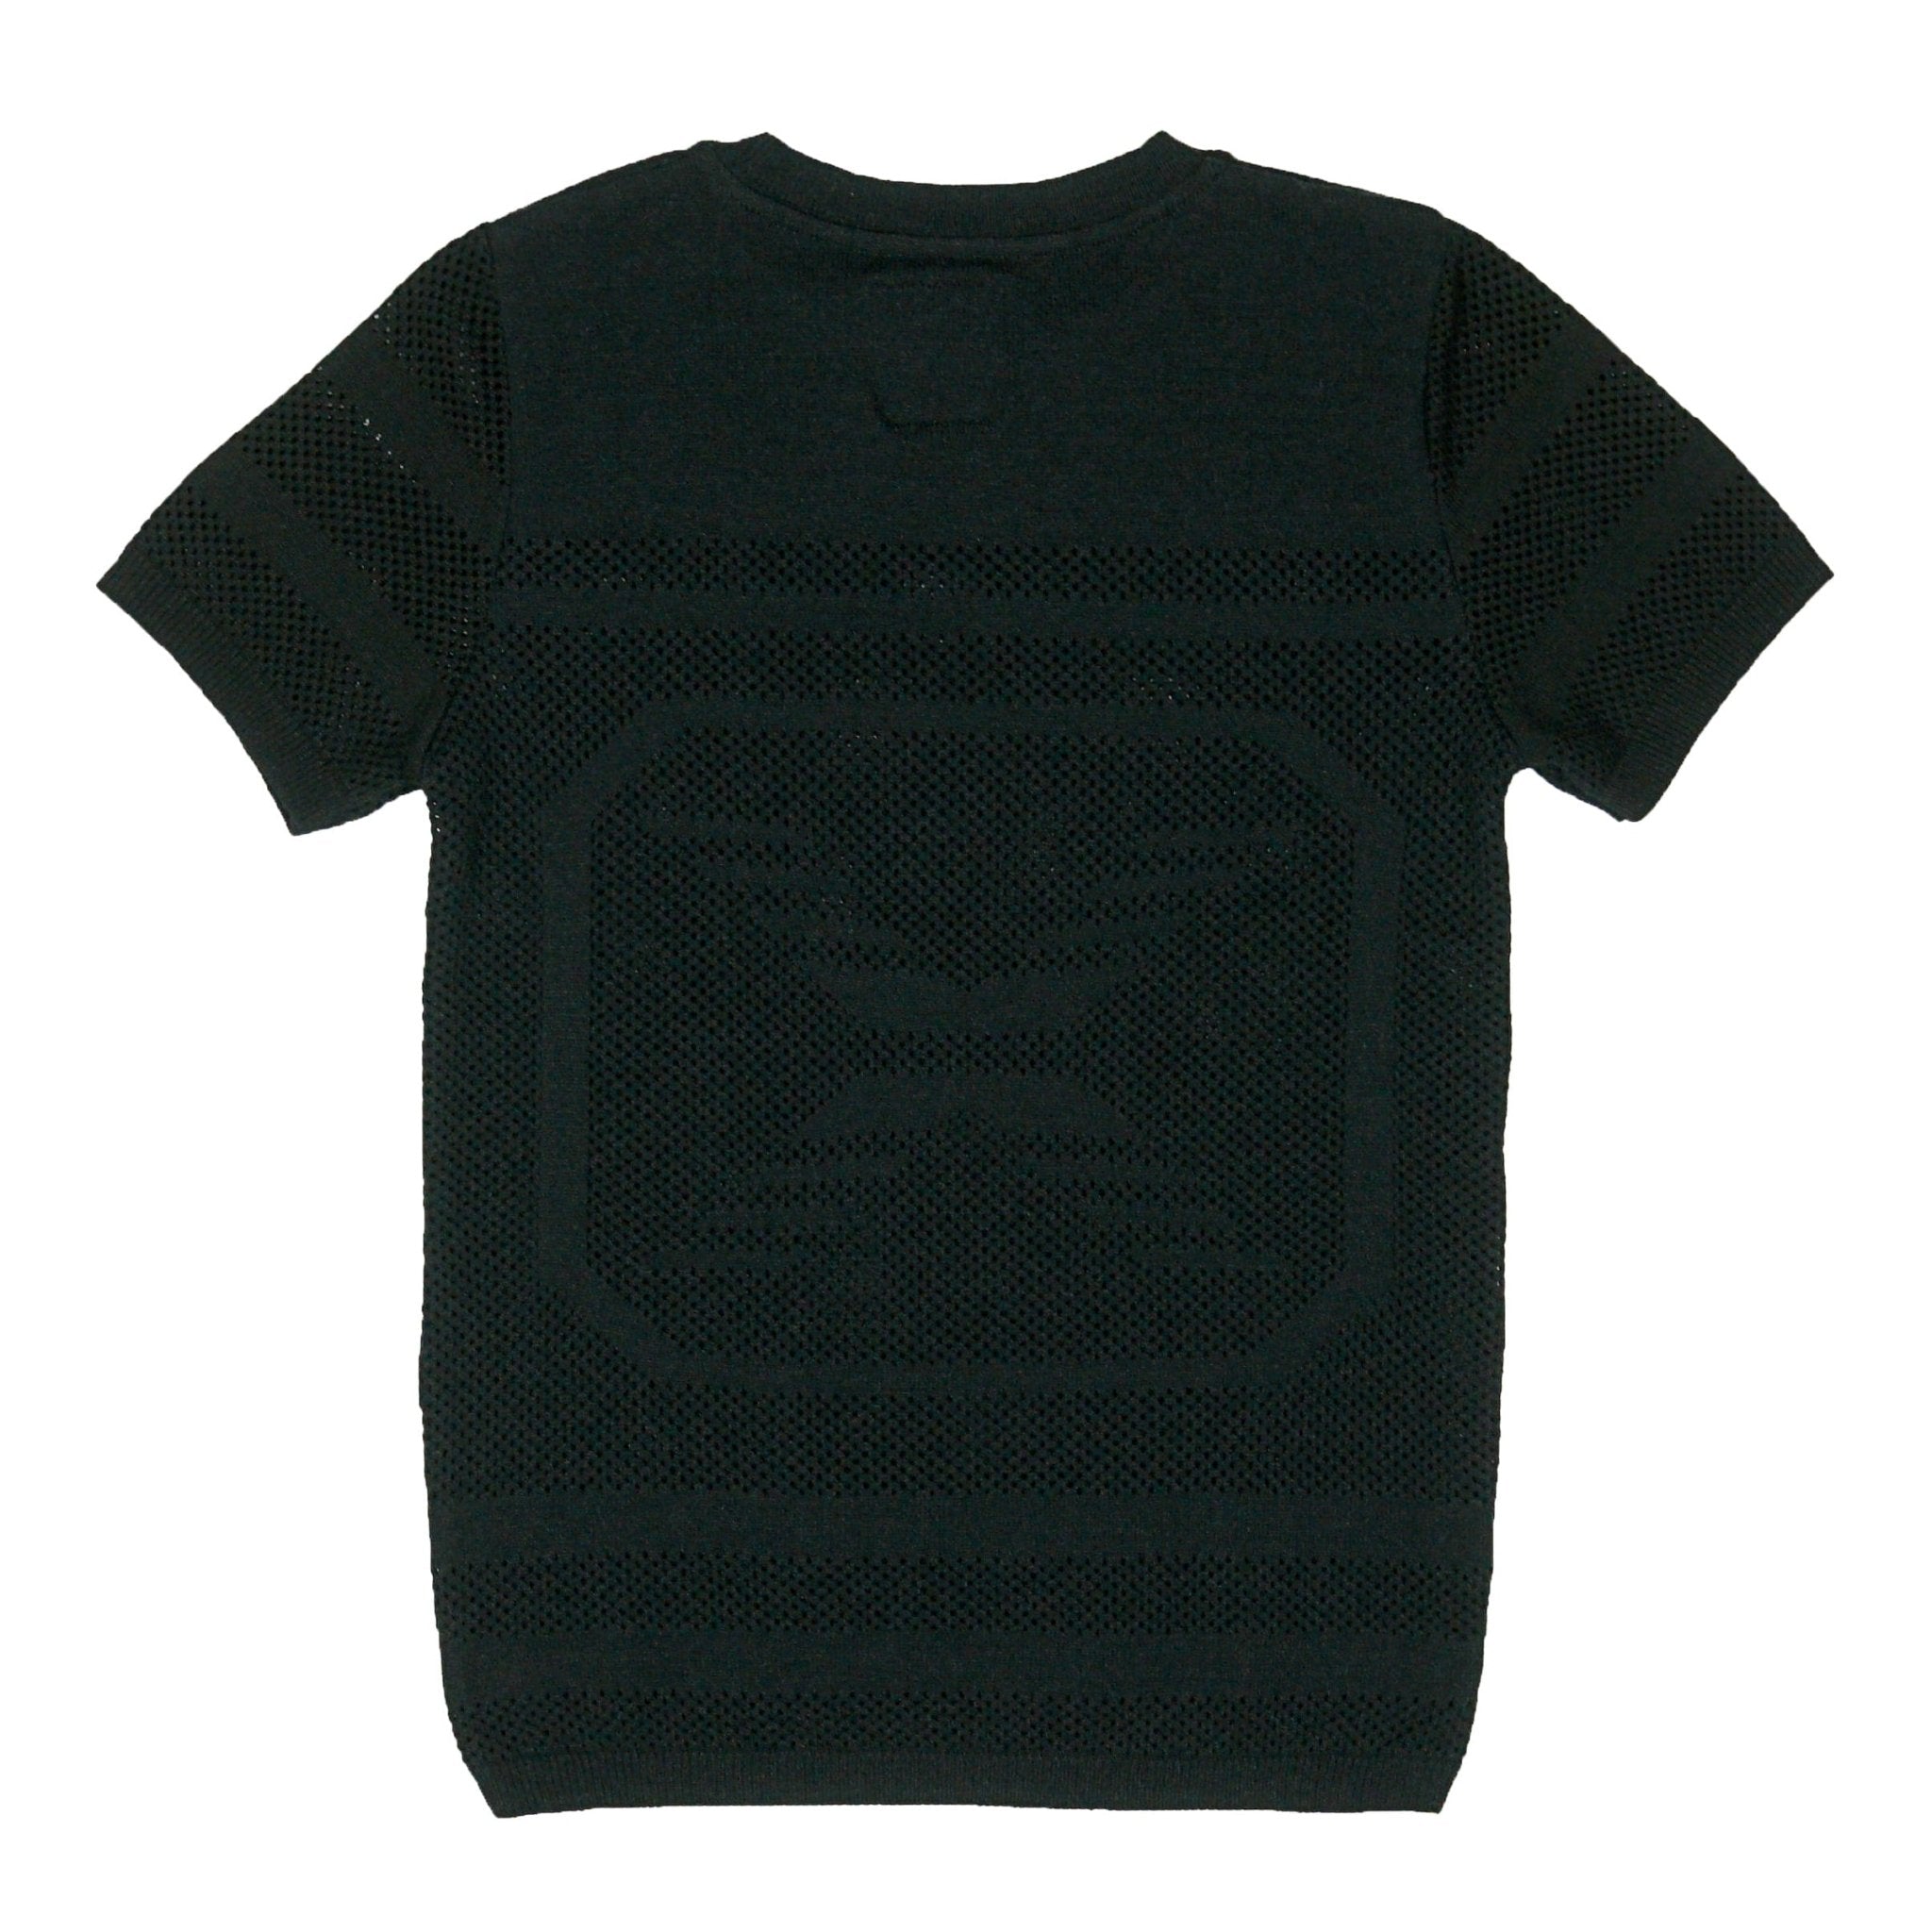 SOF Premium Logo Knit Jersey in black - State Of Flux - State Of Flux